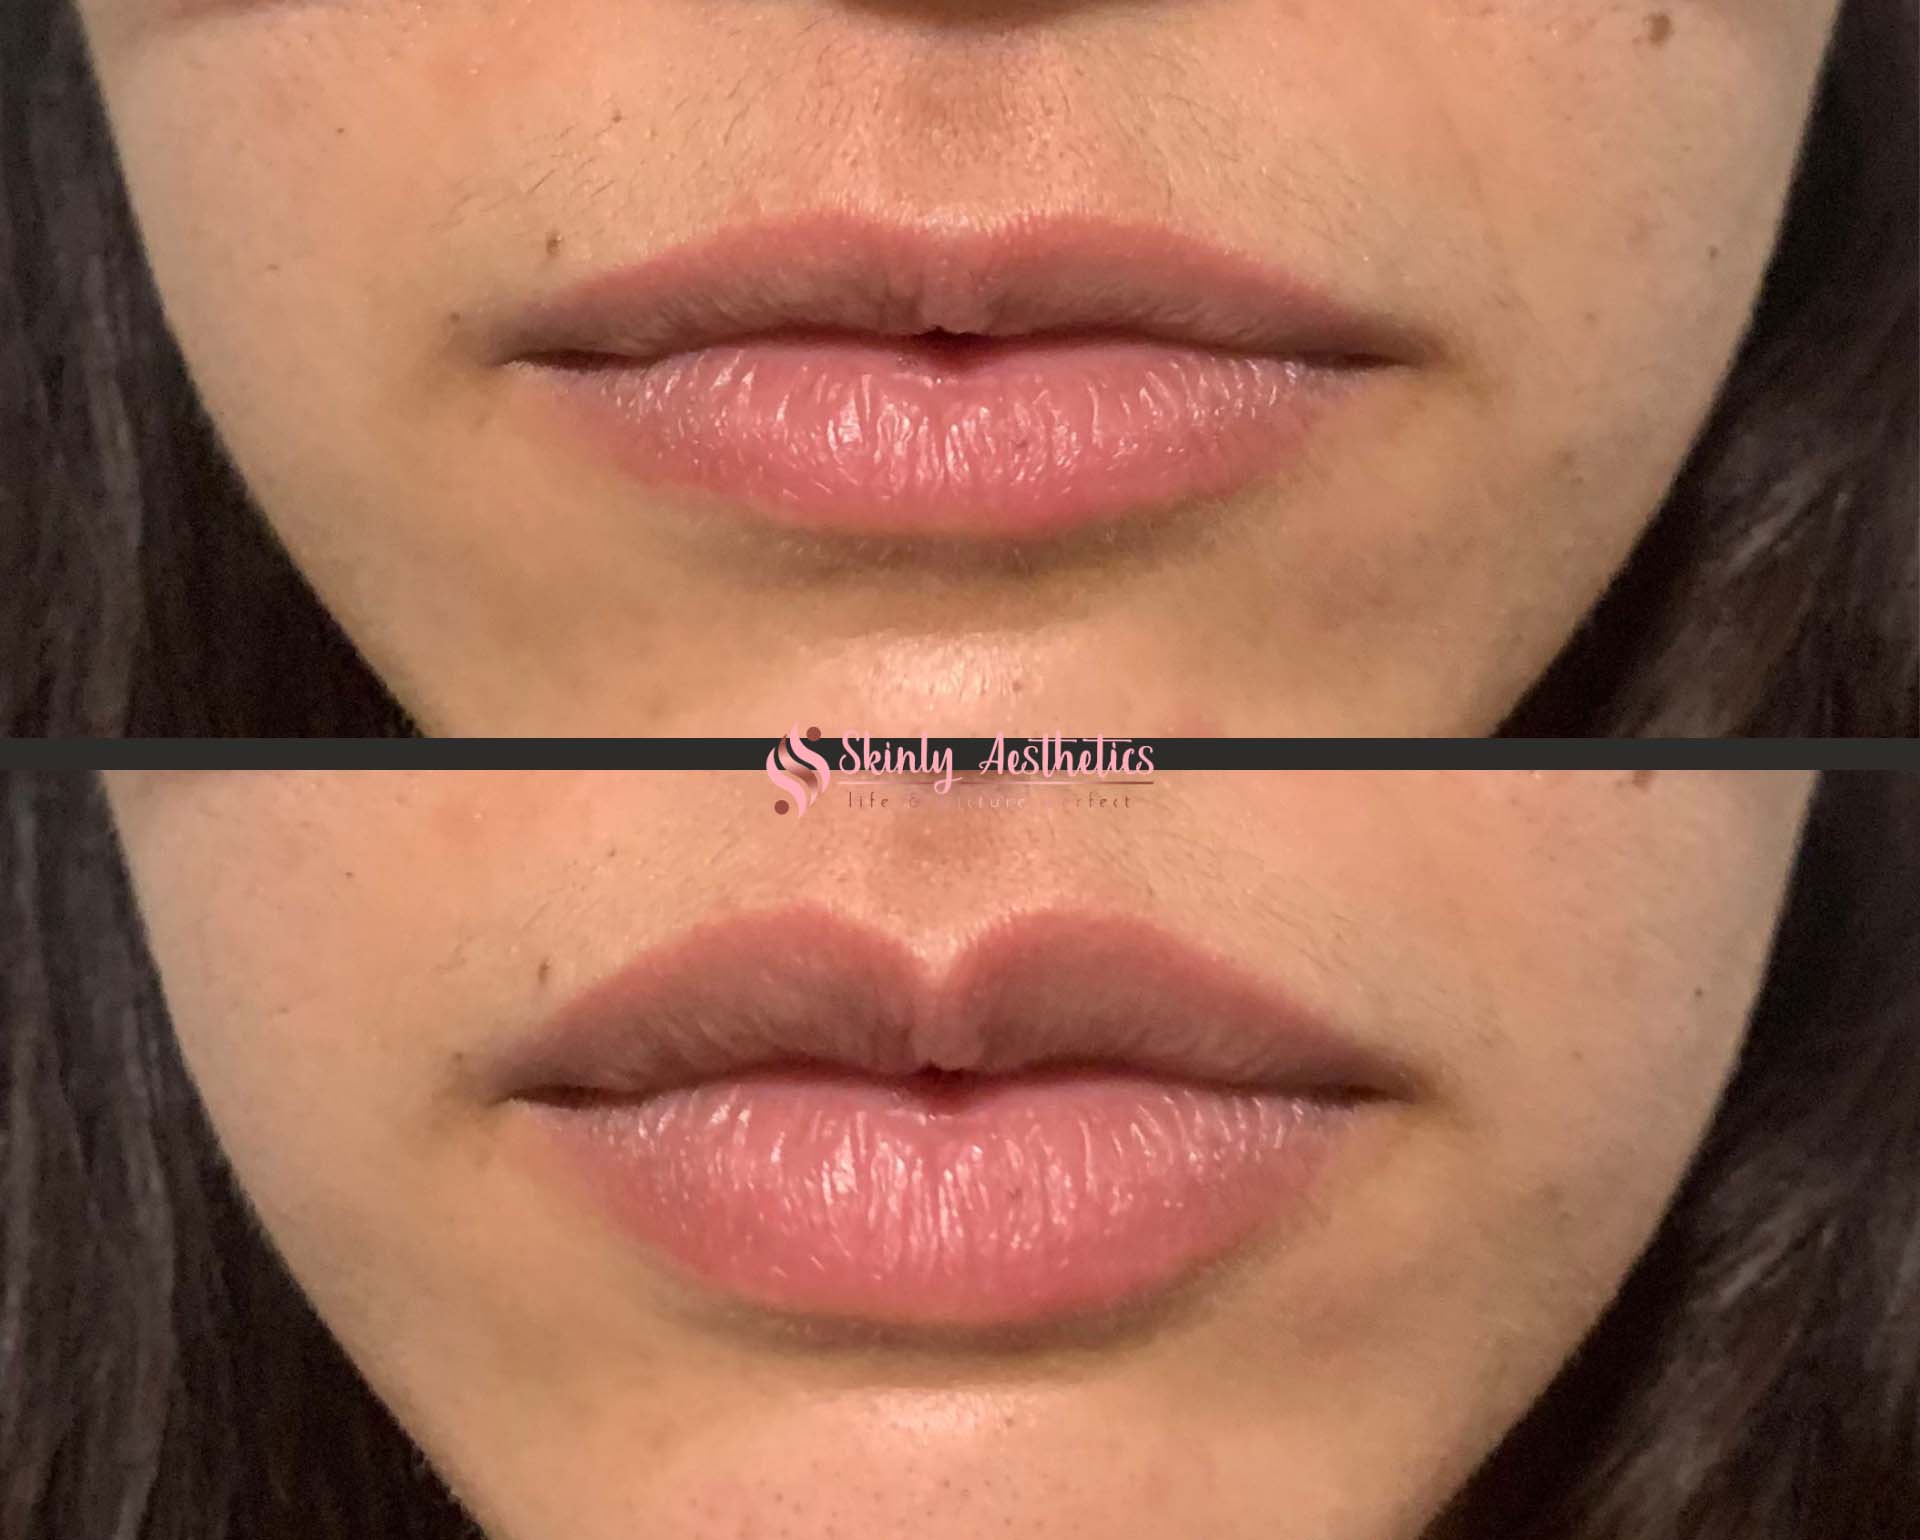 restylane lip filler injections before and after results